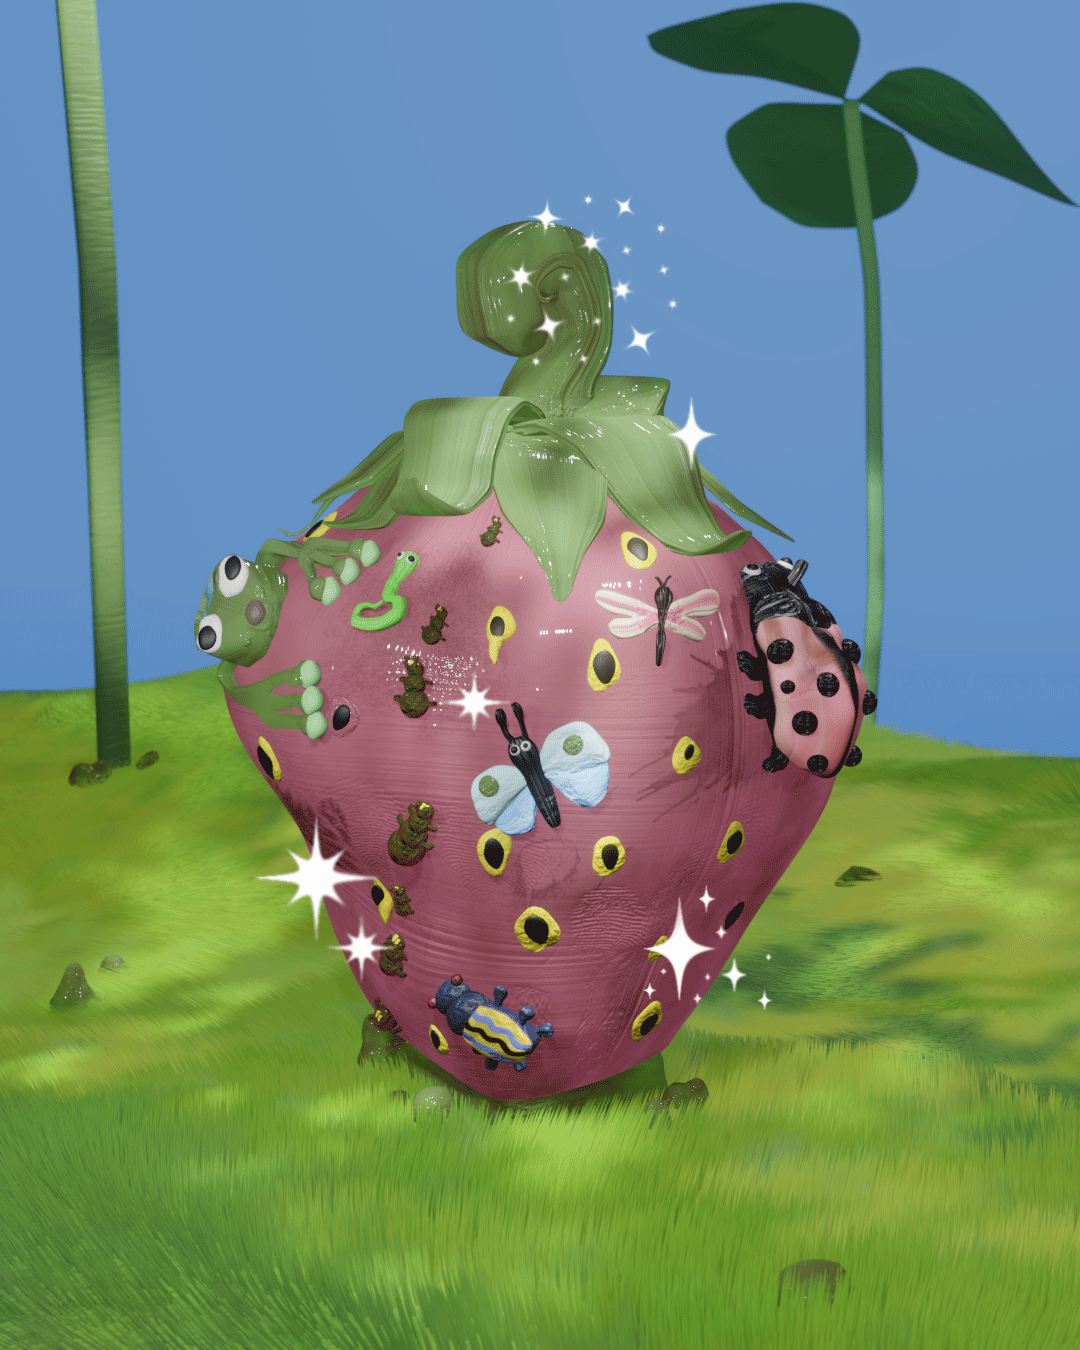 Cartoonish 3D looping animation of a decaying strawberry covered in bugs and creatures in a grassy field against a bright blue sky